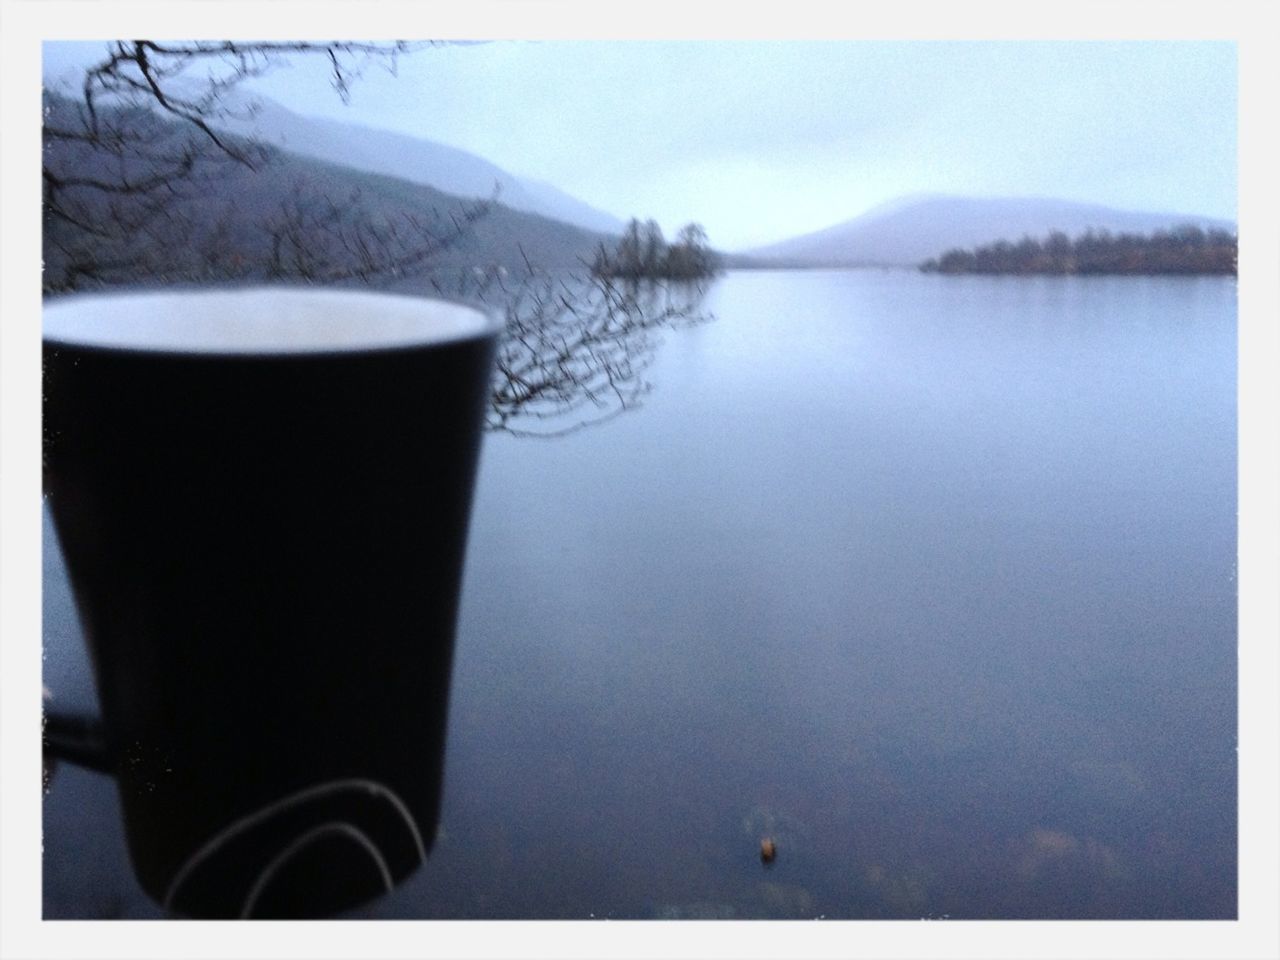 water, transfer print, drink, auto post production filter, lake, reflection, refreshment, sky, tranquil scene, tranquility, food and drink, scenics, mountain, nature, outdoors, beauty in nature, calm, coffee cup, no people, table